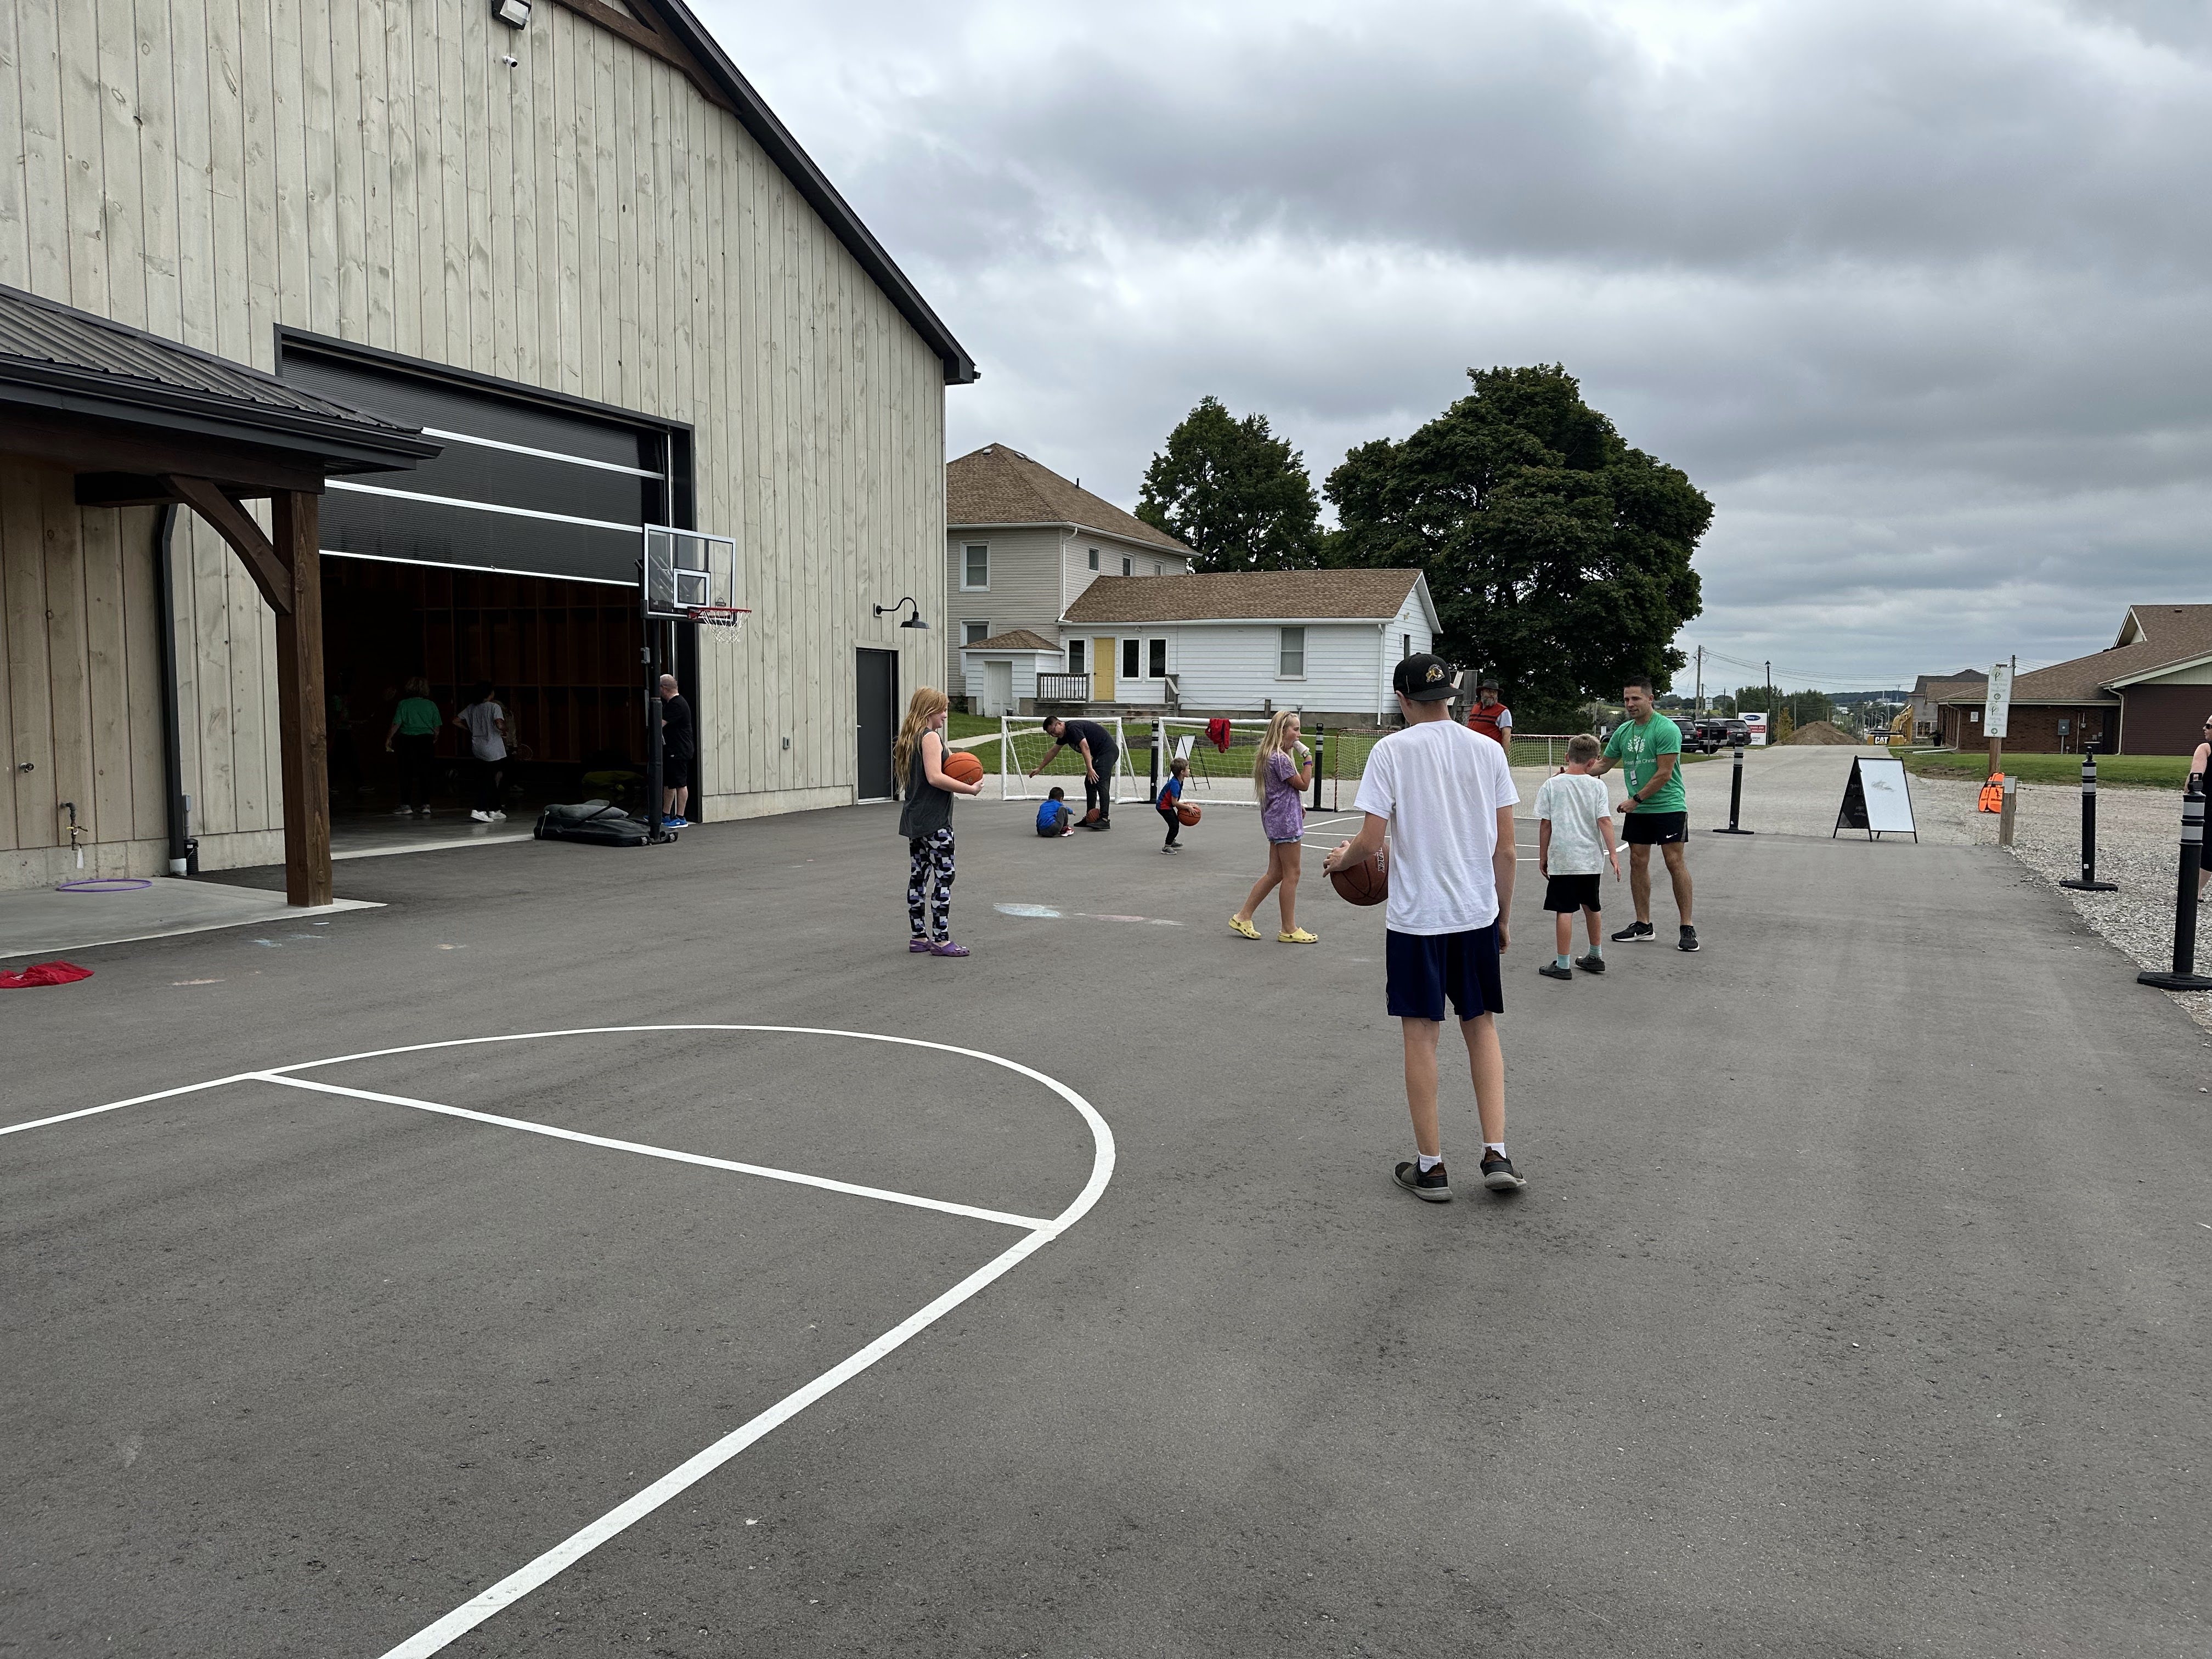 Youth playing on a basketball court.